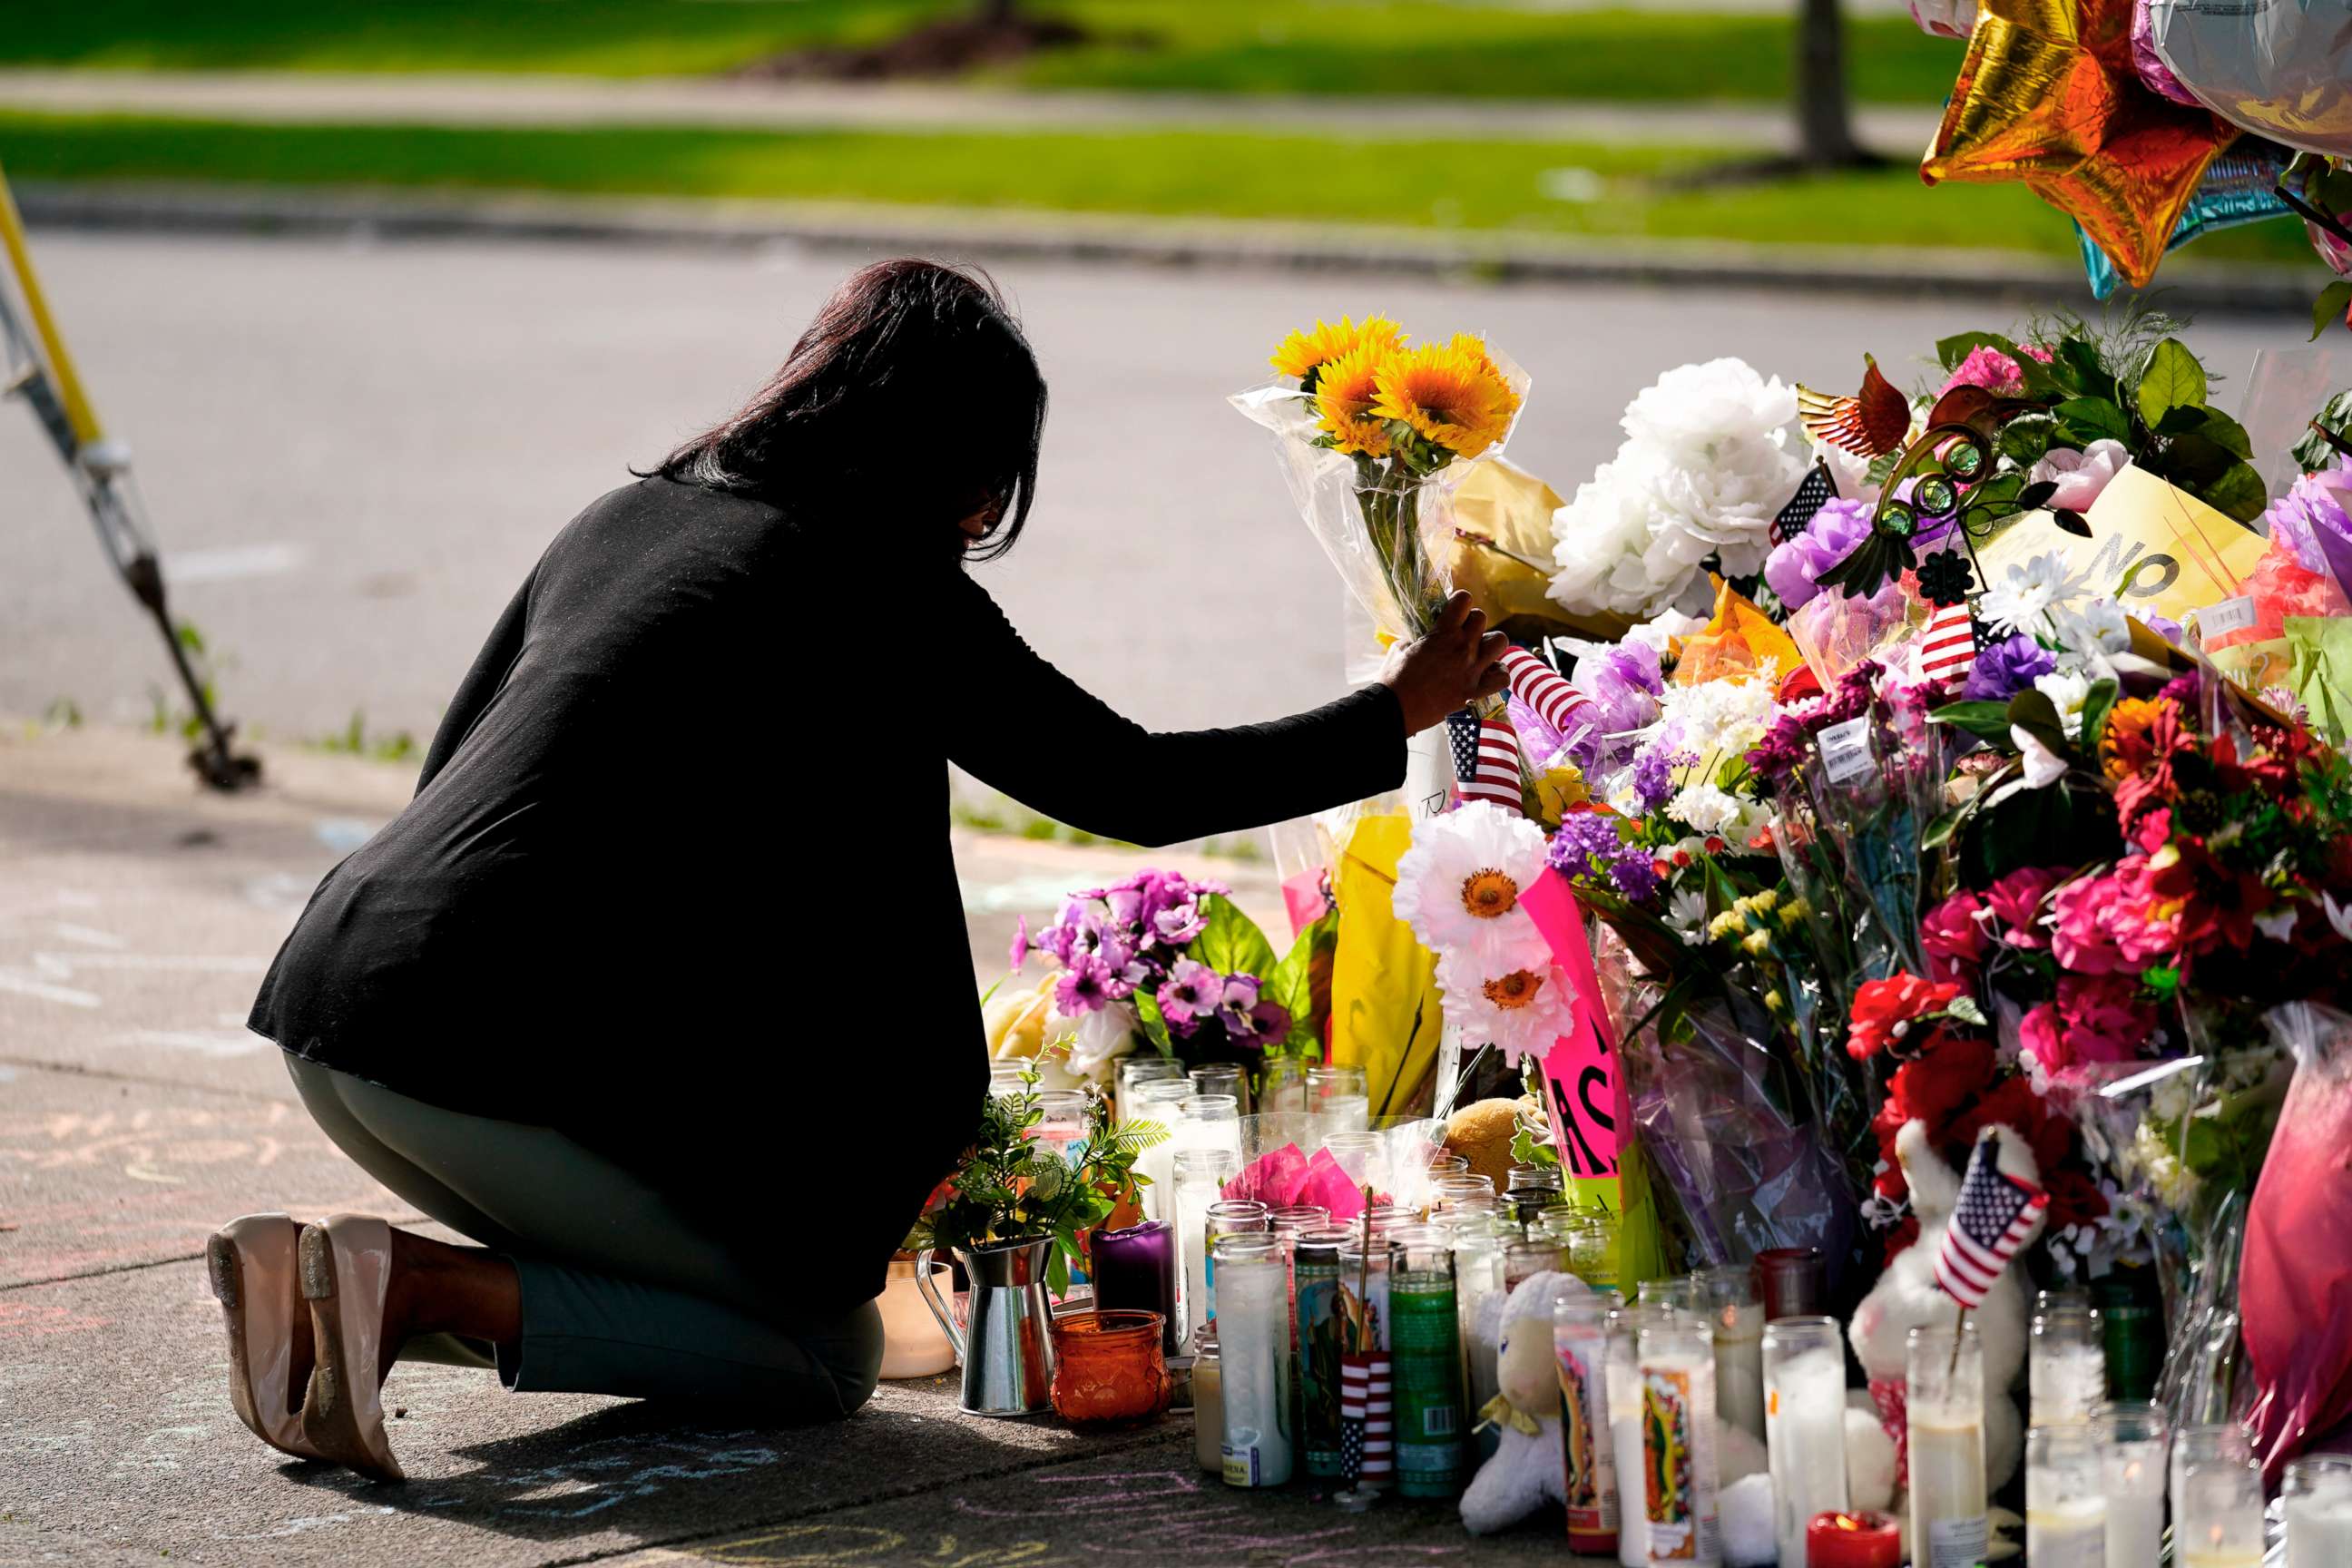 PHOTO: Shannon Waedell-Collins pays her respects at the scene of Saturday's shooting at a supermarket, in Buffalo, N.Y., May 18, 2022.